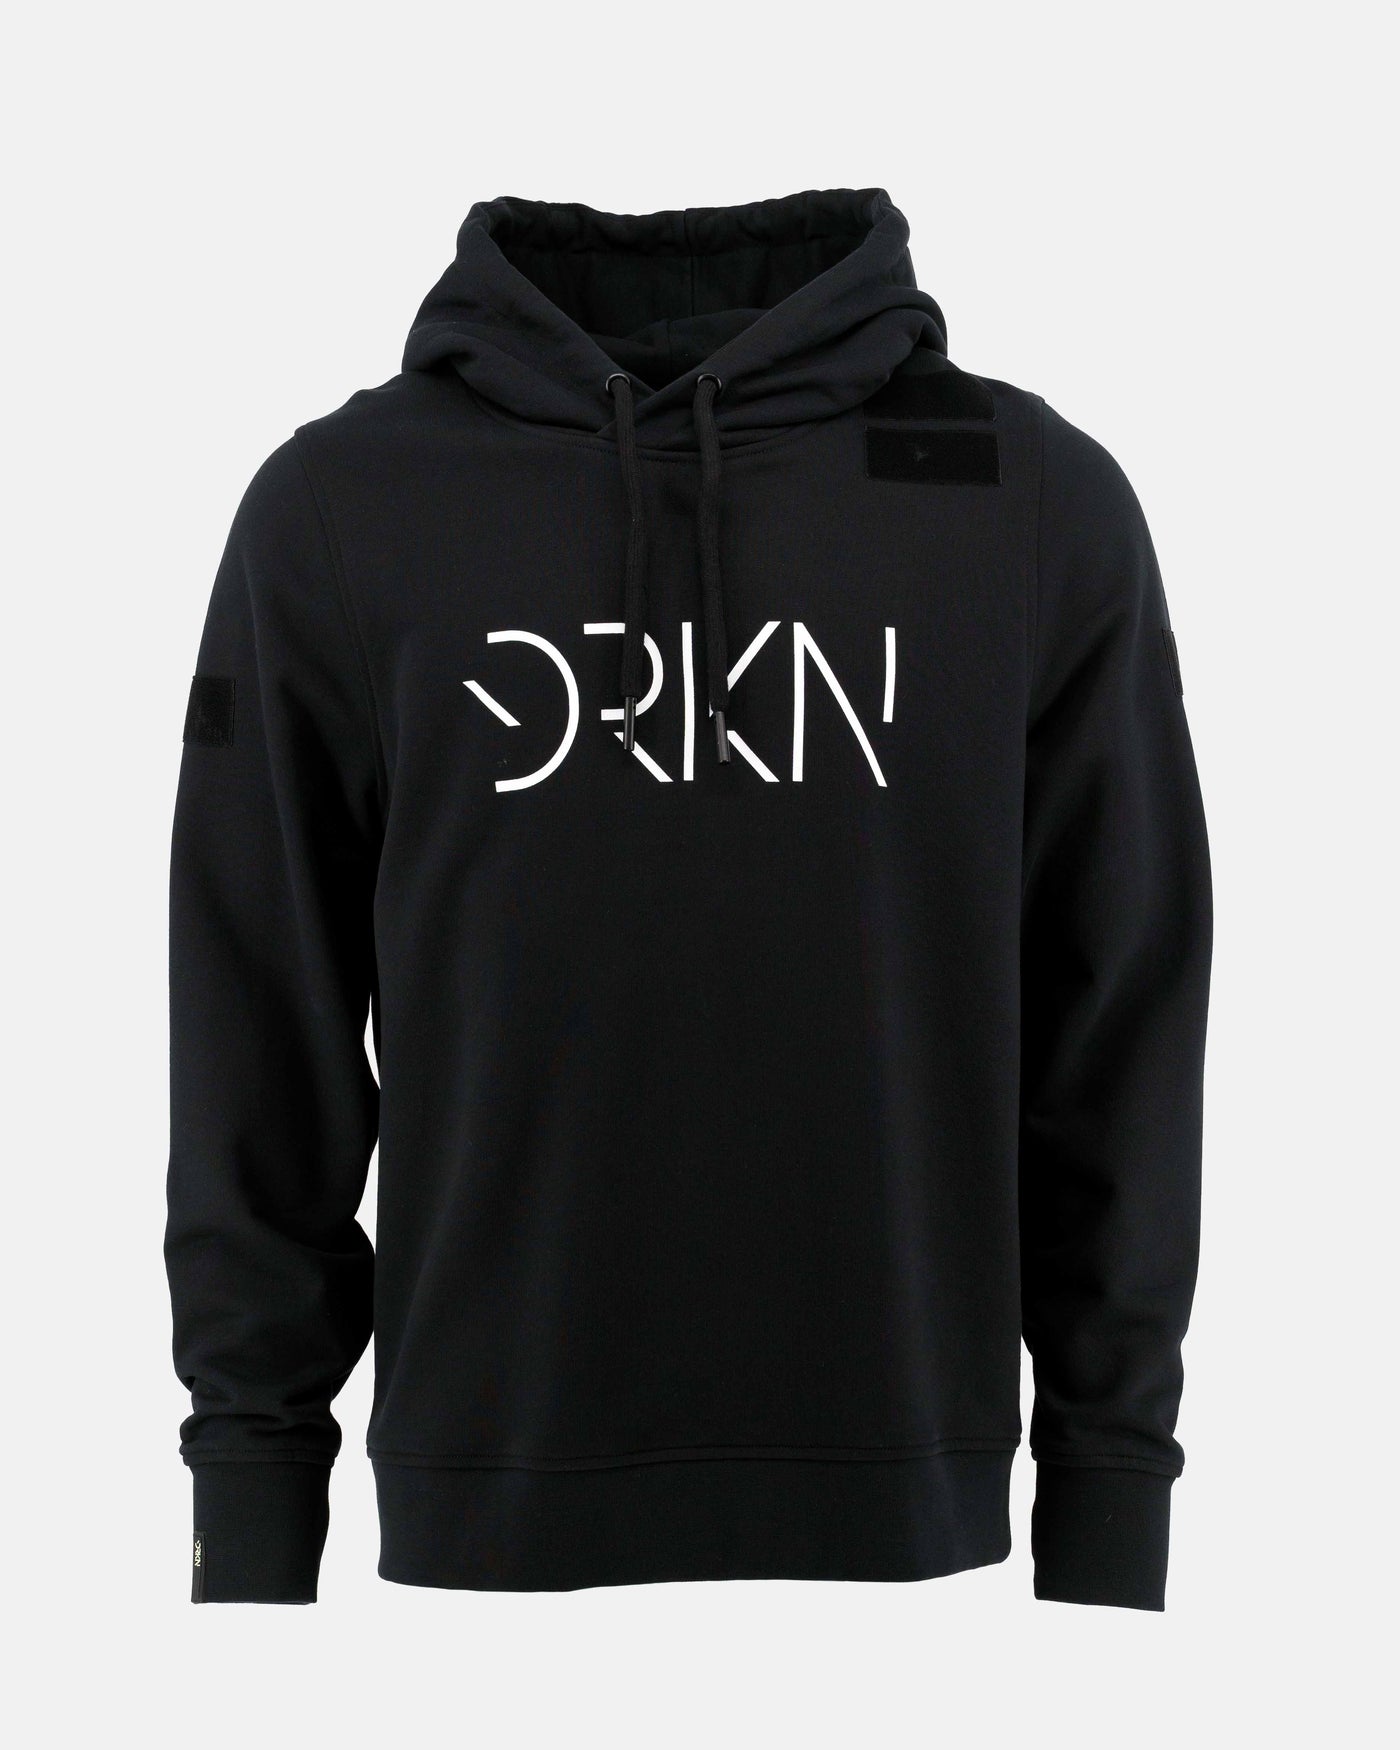 One of the signature hoodies of DRKN. Black hoodie with a white text print of DRKN.